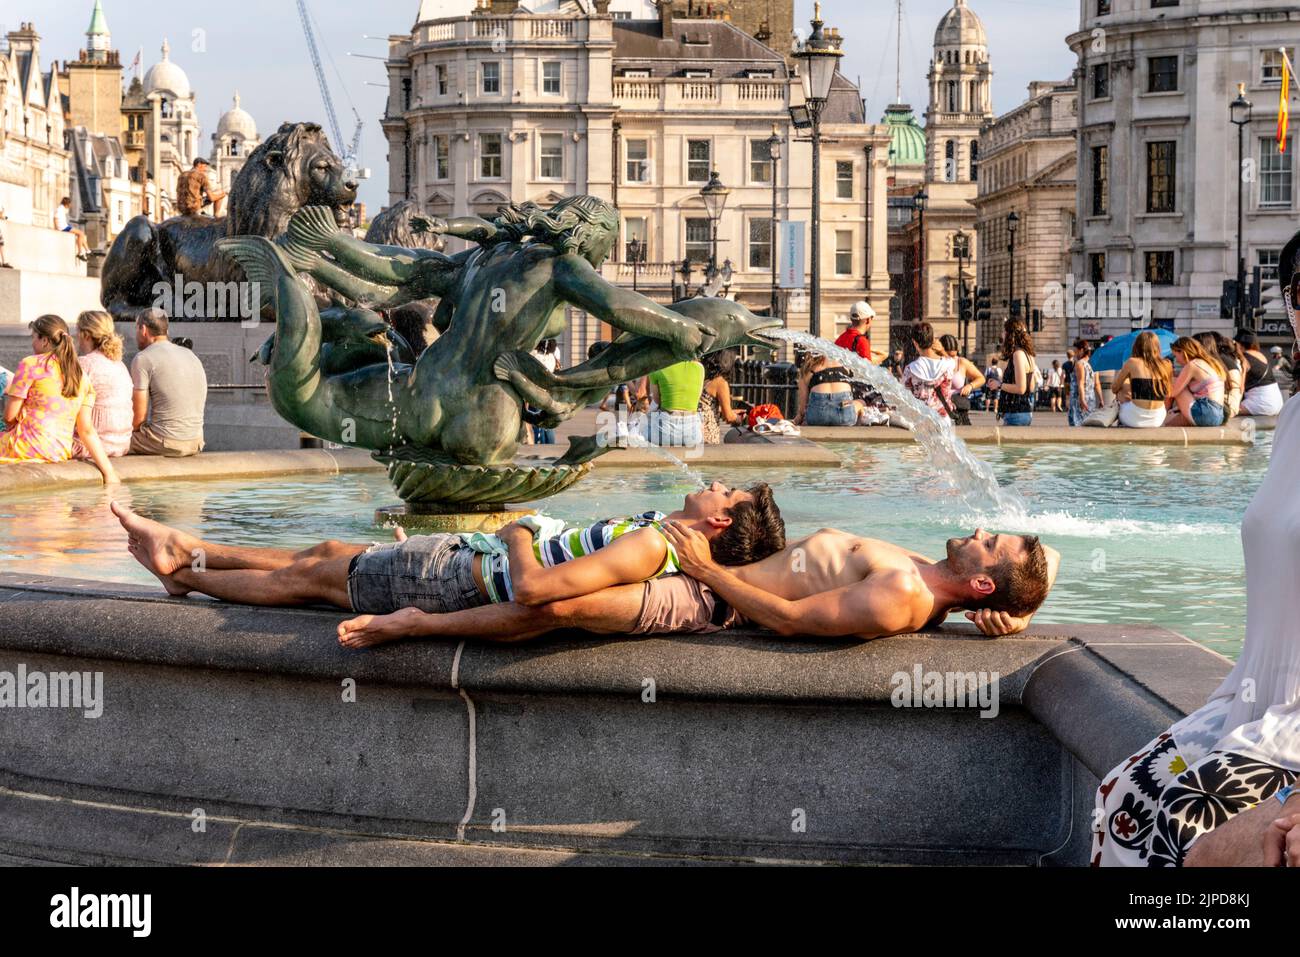 Young People Cool Off By The Water Fountains In Trafalgar Square During The Hottest Day Ever Recorded In The Capital, London, UK. Stock Photo